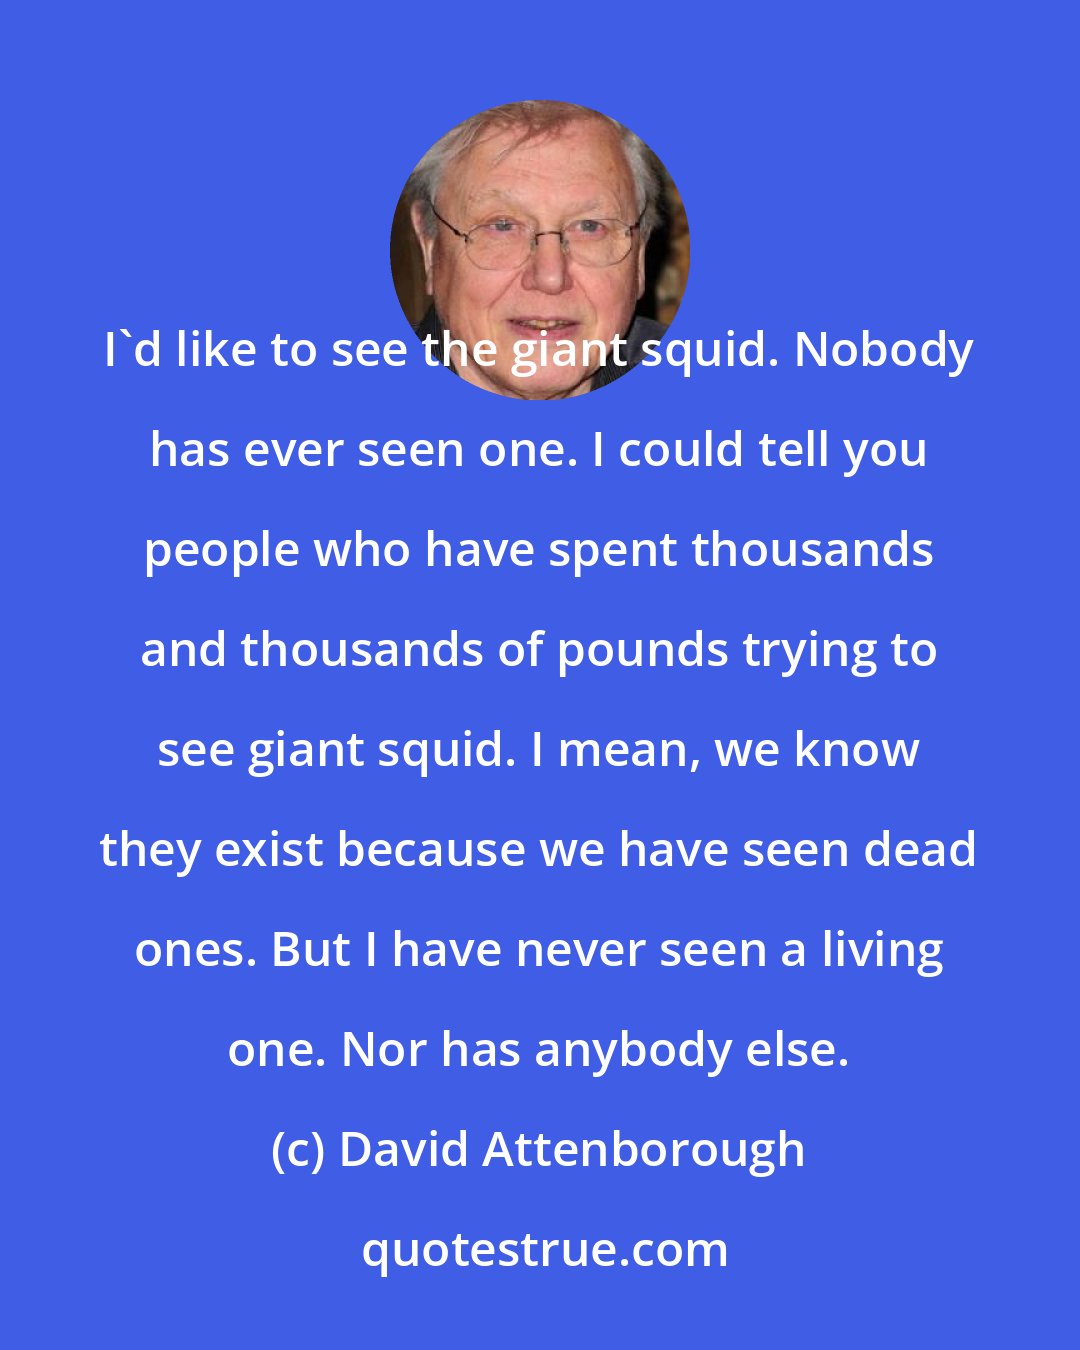 David Attenborough: I'd like to see the giant squid. Nobody has ever seen one. I could tell you people who have spent thousands and thousands of pounds trying to see giant squid. I mean, we know they exist because we have seen dead ones. But I have never seen a living one. Nor has anybody else.